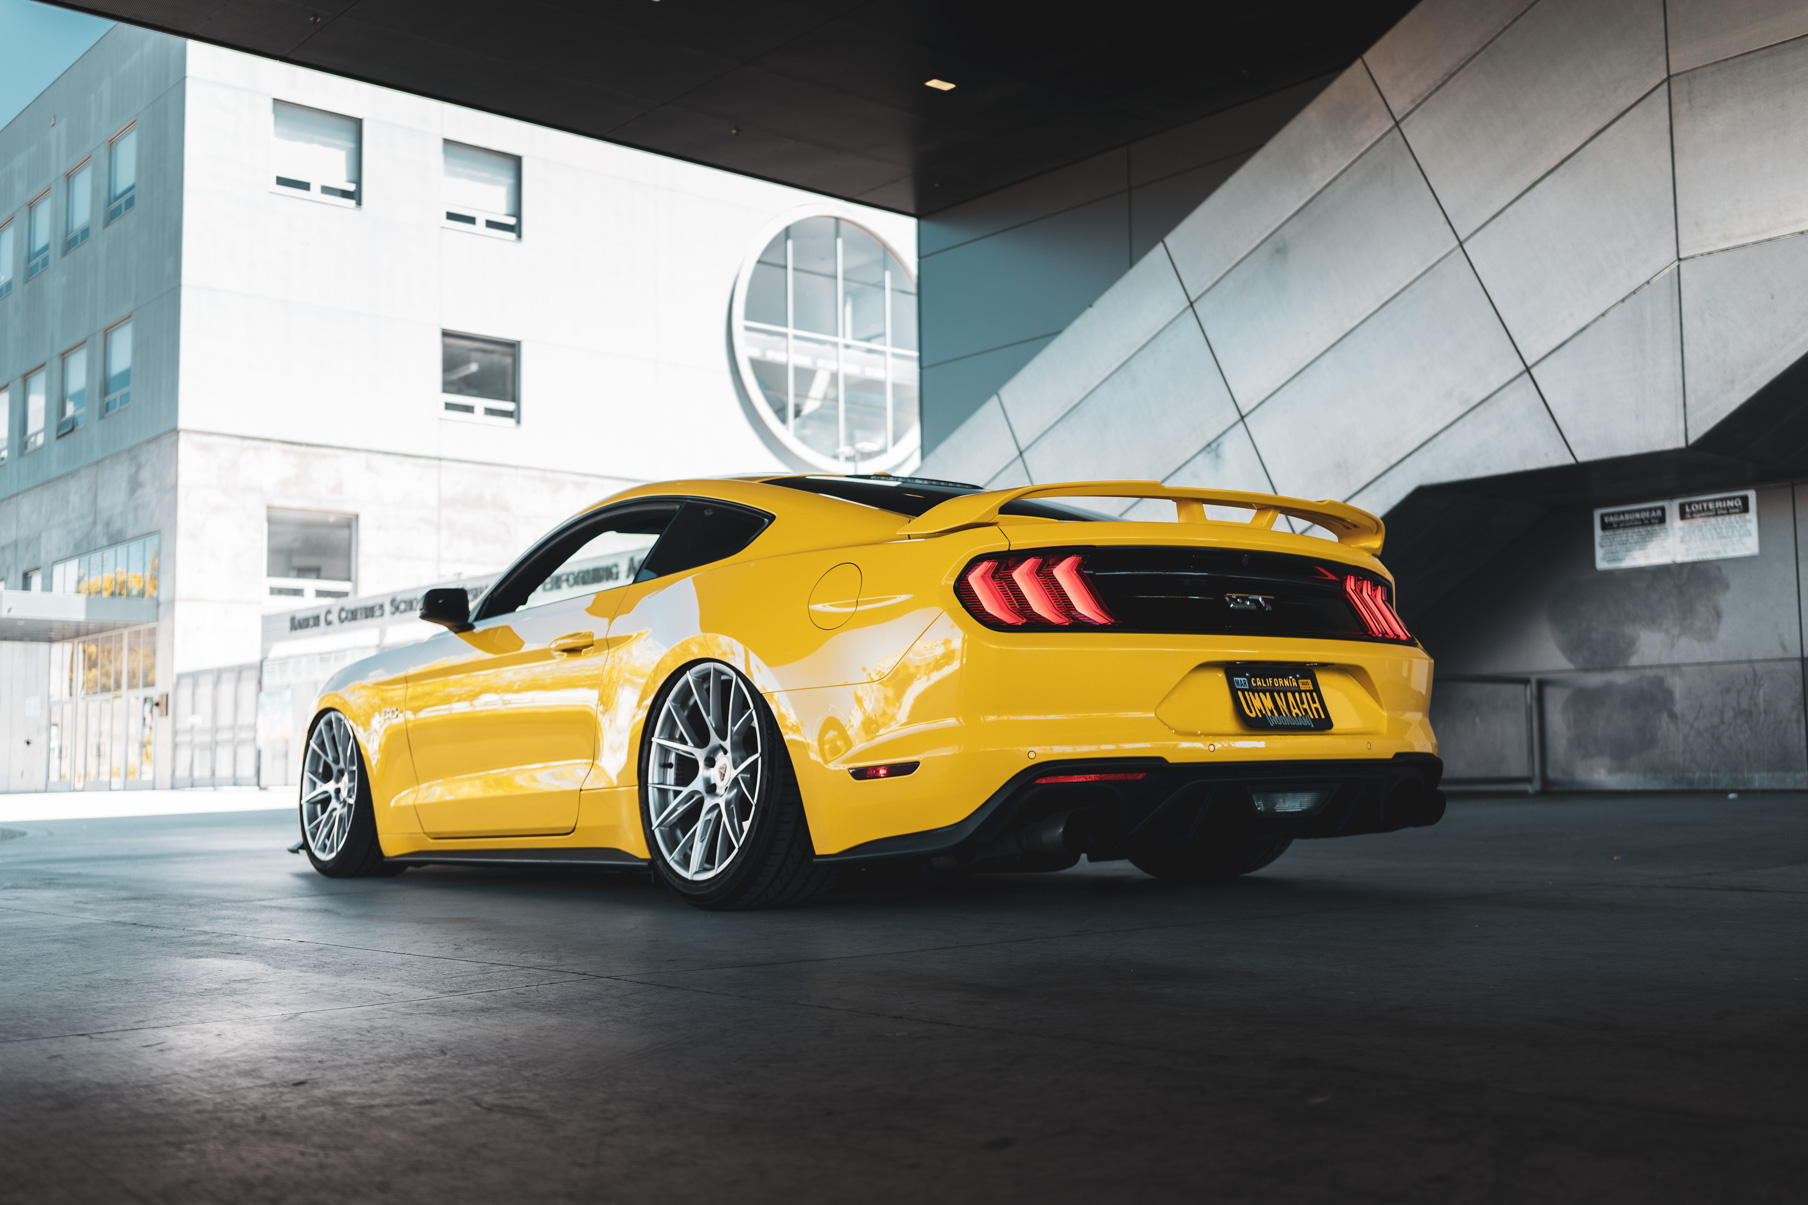 S650 Mustang Blaque Diamond BD-F18 BD-D25 BD-F29 Flow Forged Series - Vibe Motorsports 2018_Ford_Mustang_GT_Blaque_Diamond_Wheels_BDF18_20_inch_Brushed_Silver-19-1